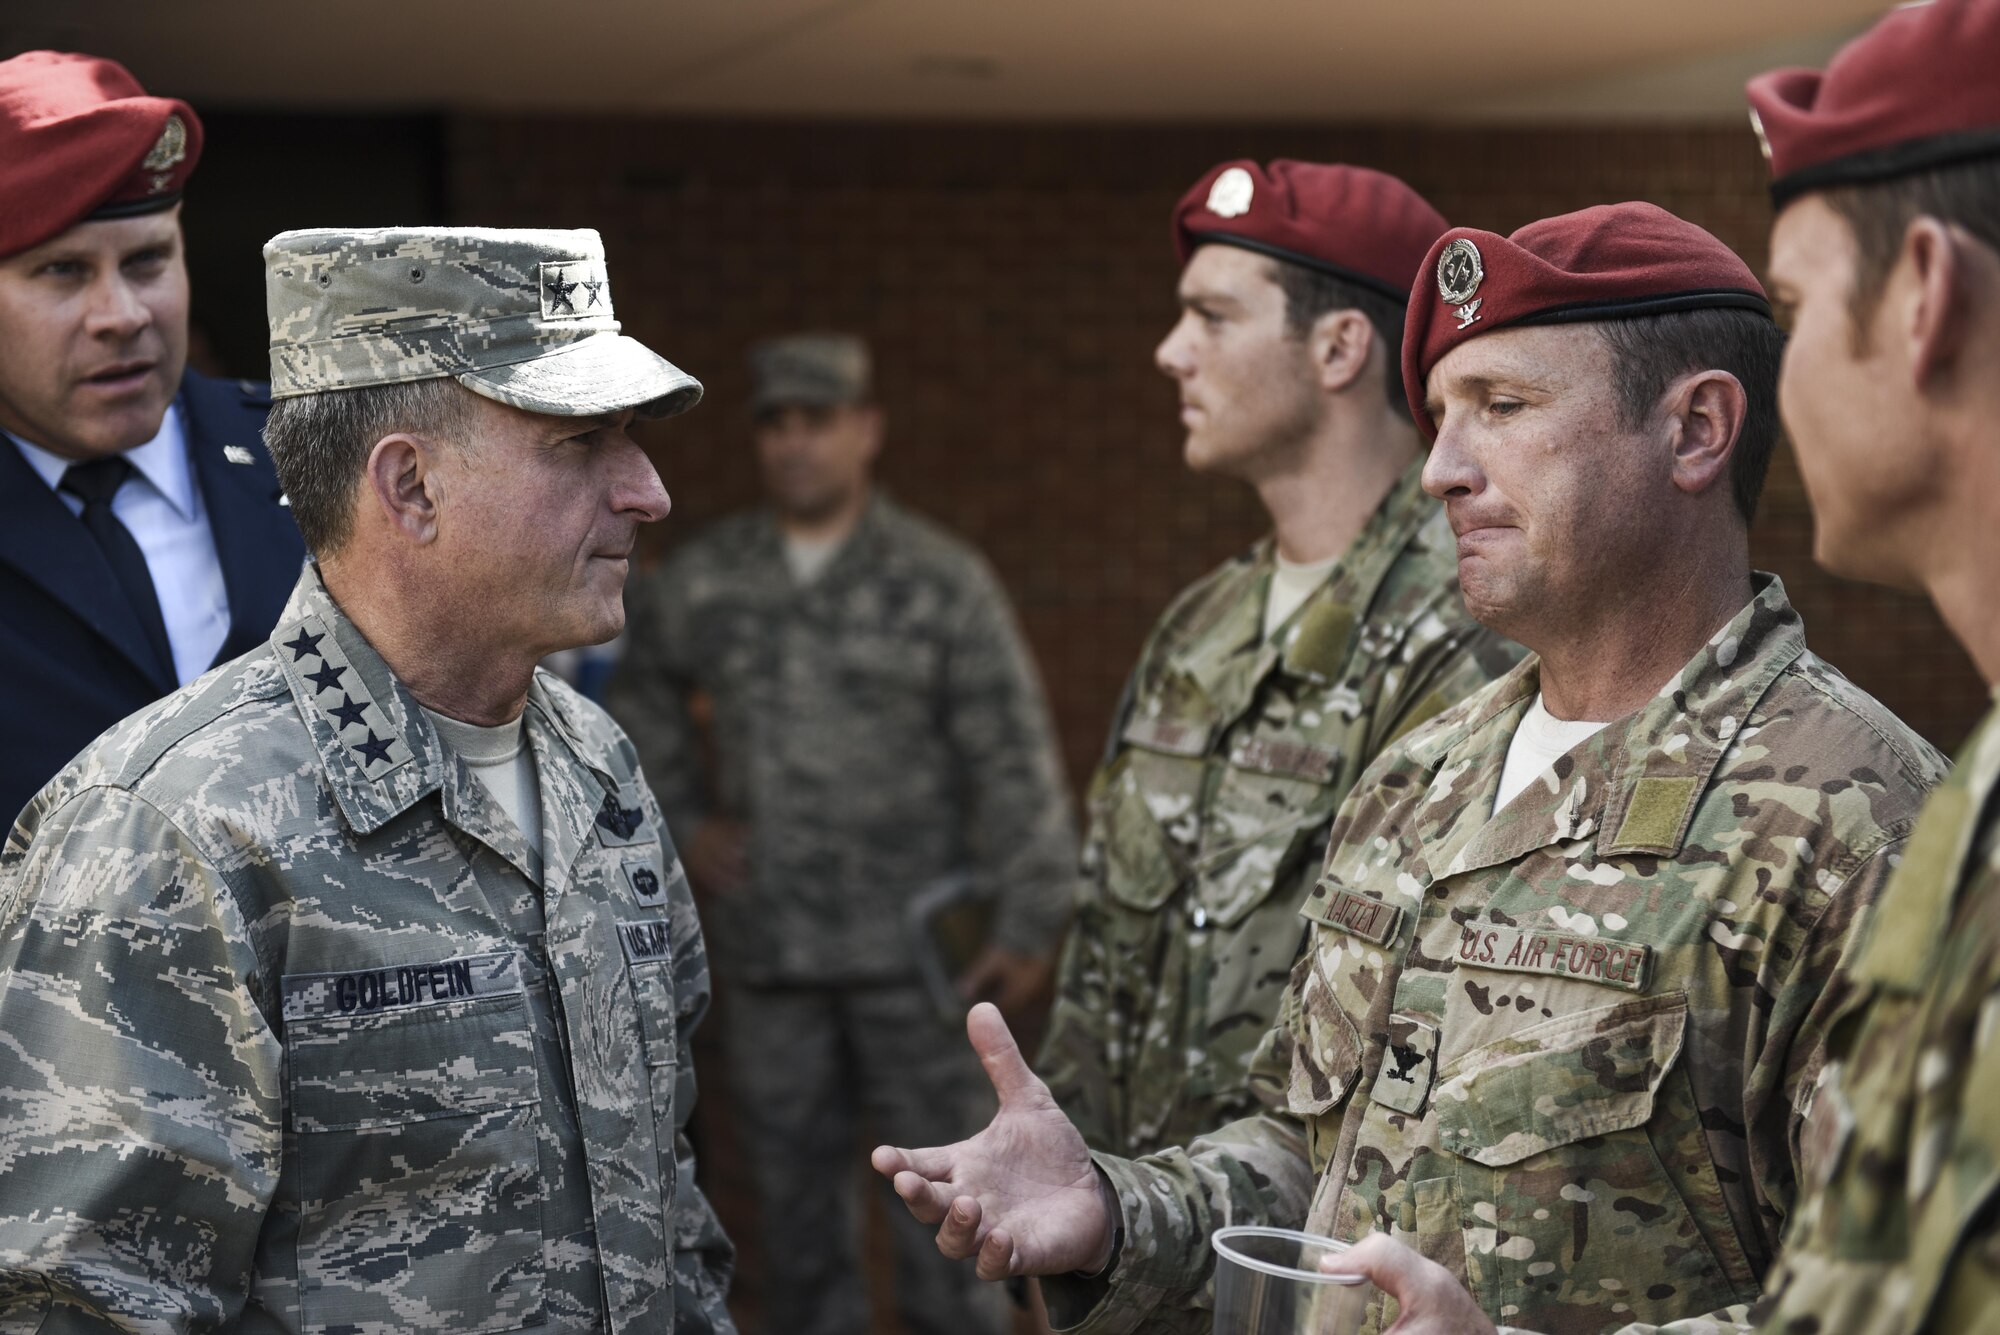 Air Force Chief of Staff David L. Goldfein greets a special tactics officer following the Special Tactics Memorial dedication ceremony at Hurlburt Field, Fla., Oct. 20, 2016. Goldfein was the keynote speaker for the ceremony. In addition to the ceremony, he met with Air Force Special Operations Command leadership, 505th Command and Control Wing personnel and Air Commandos around base. (U.S. Air Force photo by Senior Airman Jeffrey Parkinson)